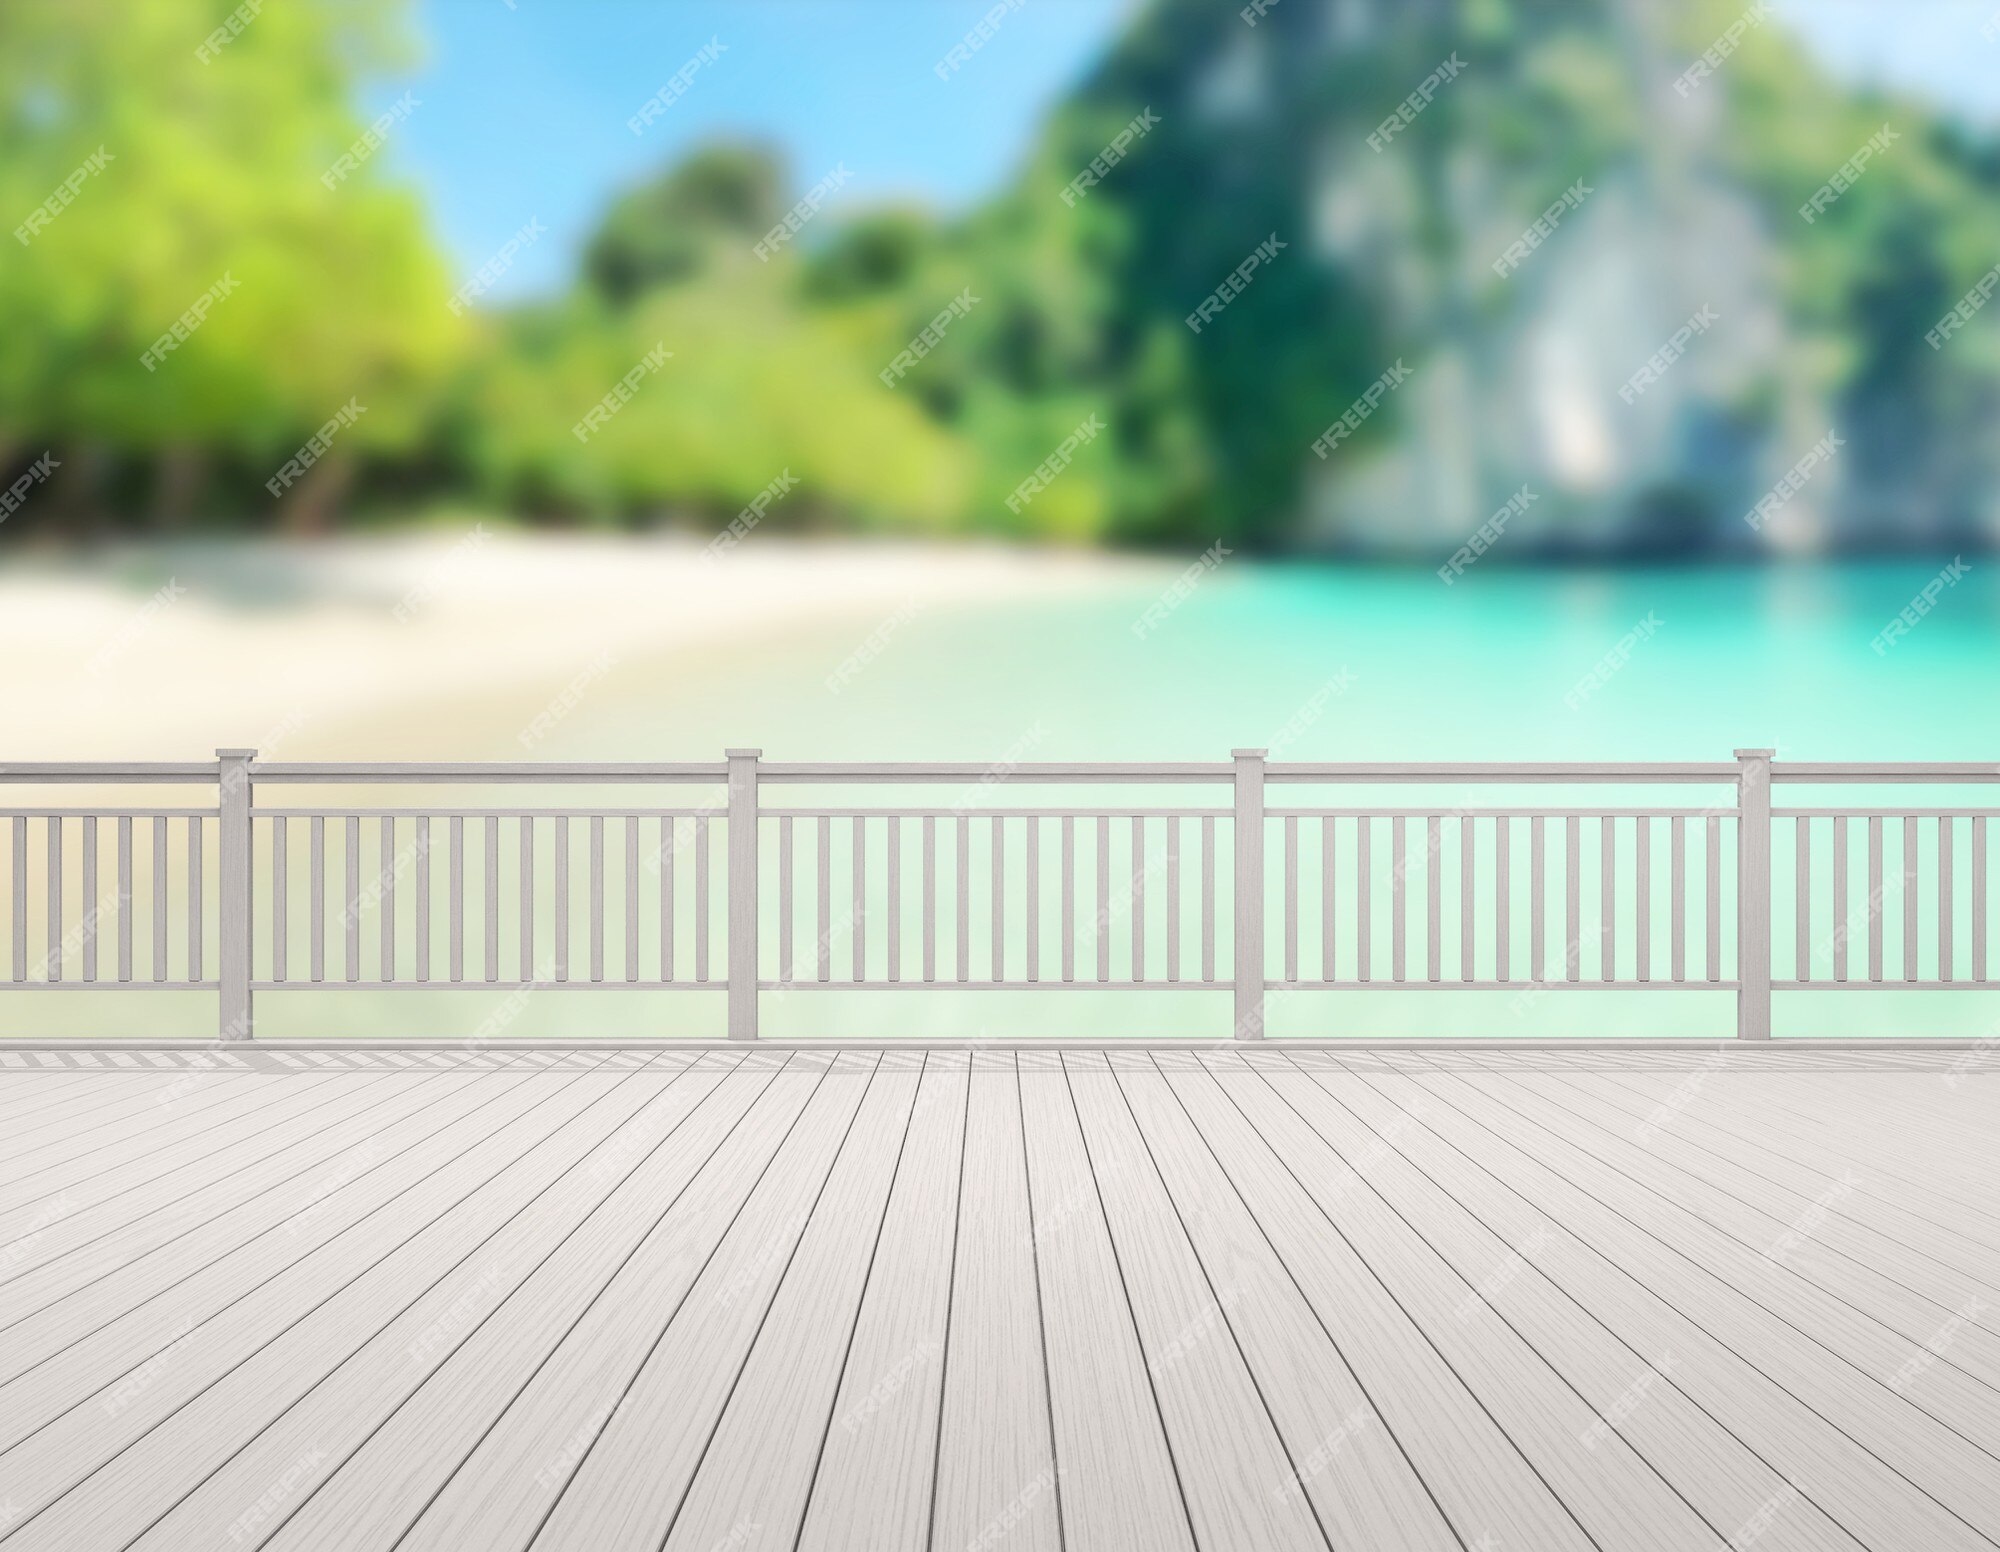 Premium Photo | Balcony and terrace of blur nature background